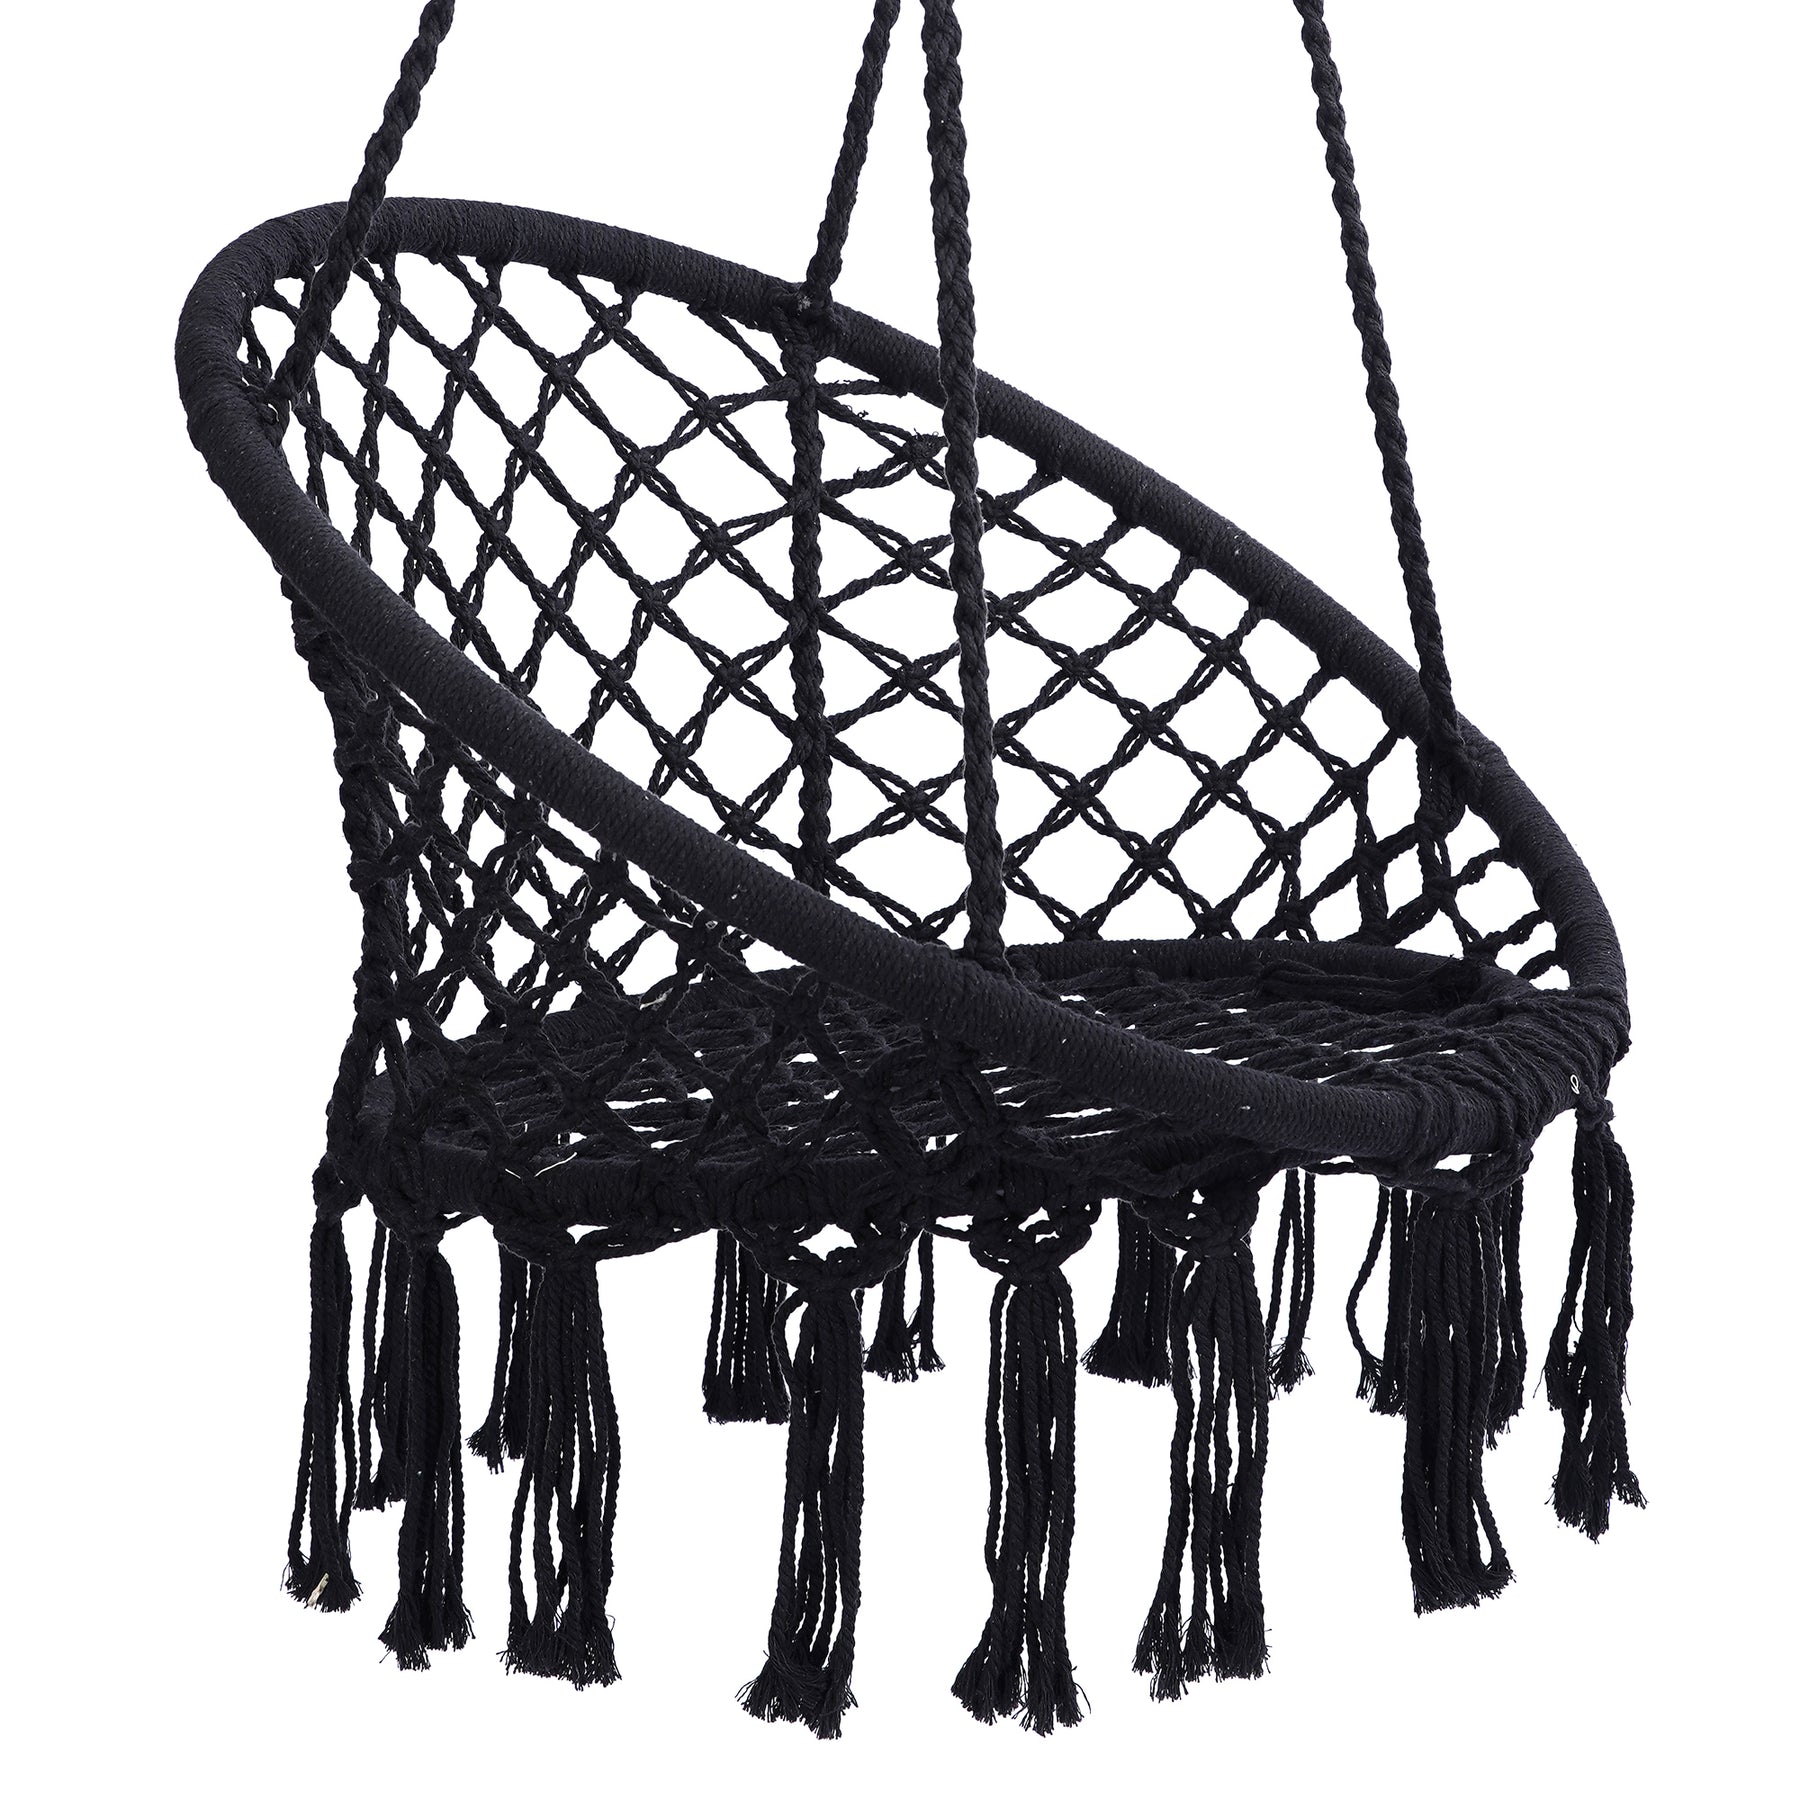 Black Swing，Hammock Chair Macrame Swing，Max 330 Lbs Hanging Cotton Rope Hammock Swing Chair for Indoor and Outdoor - Tonkn